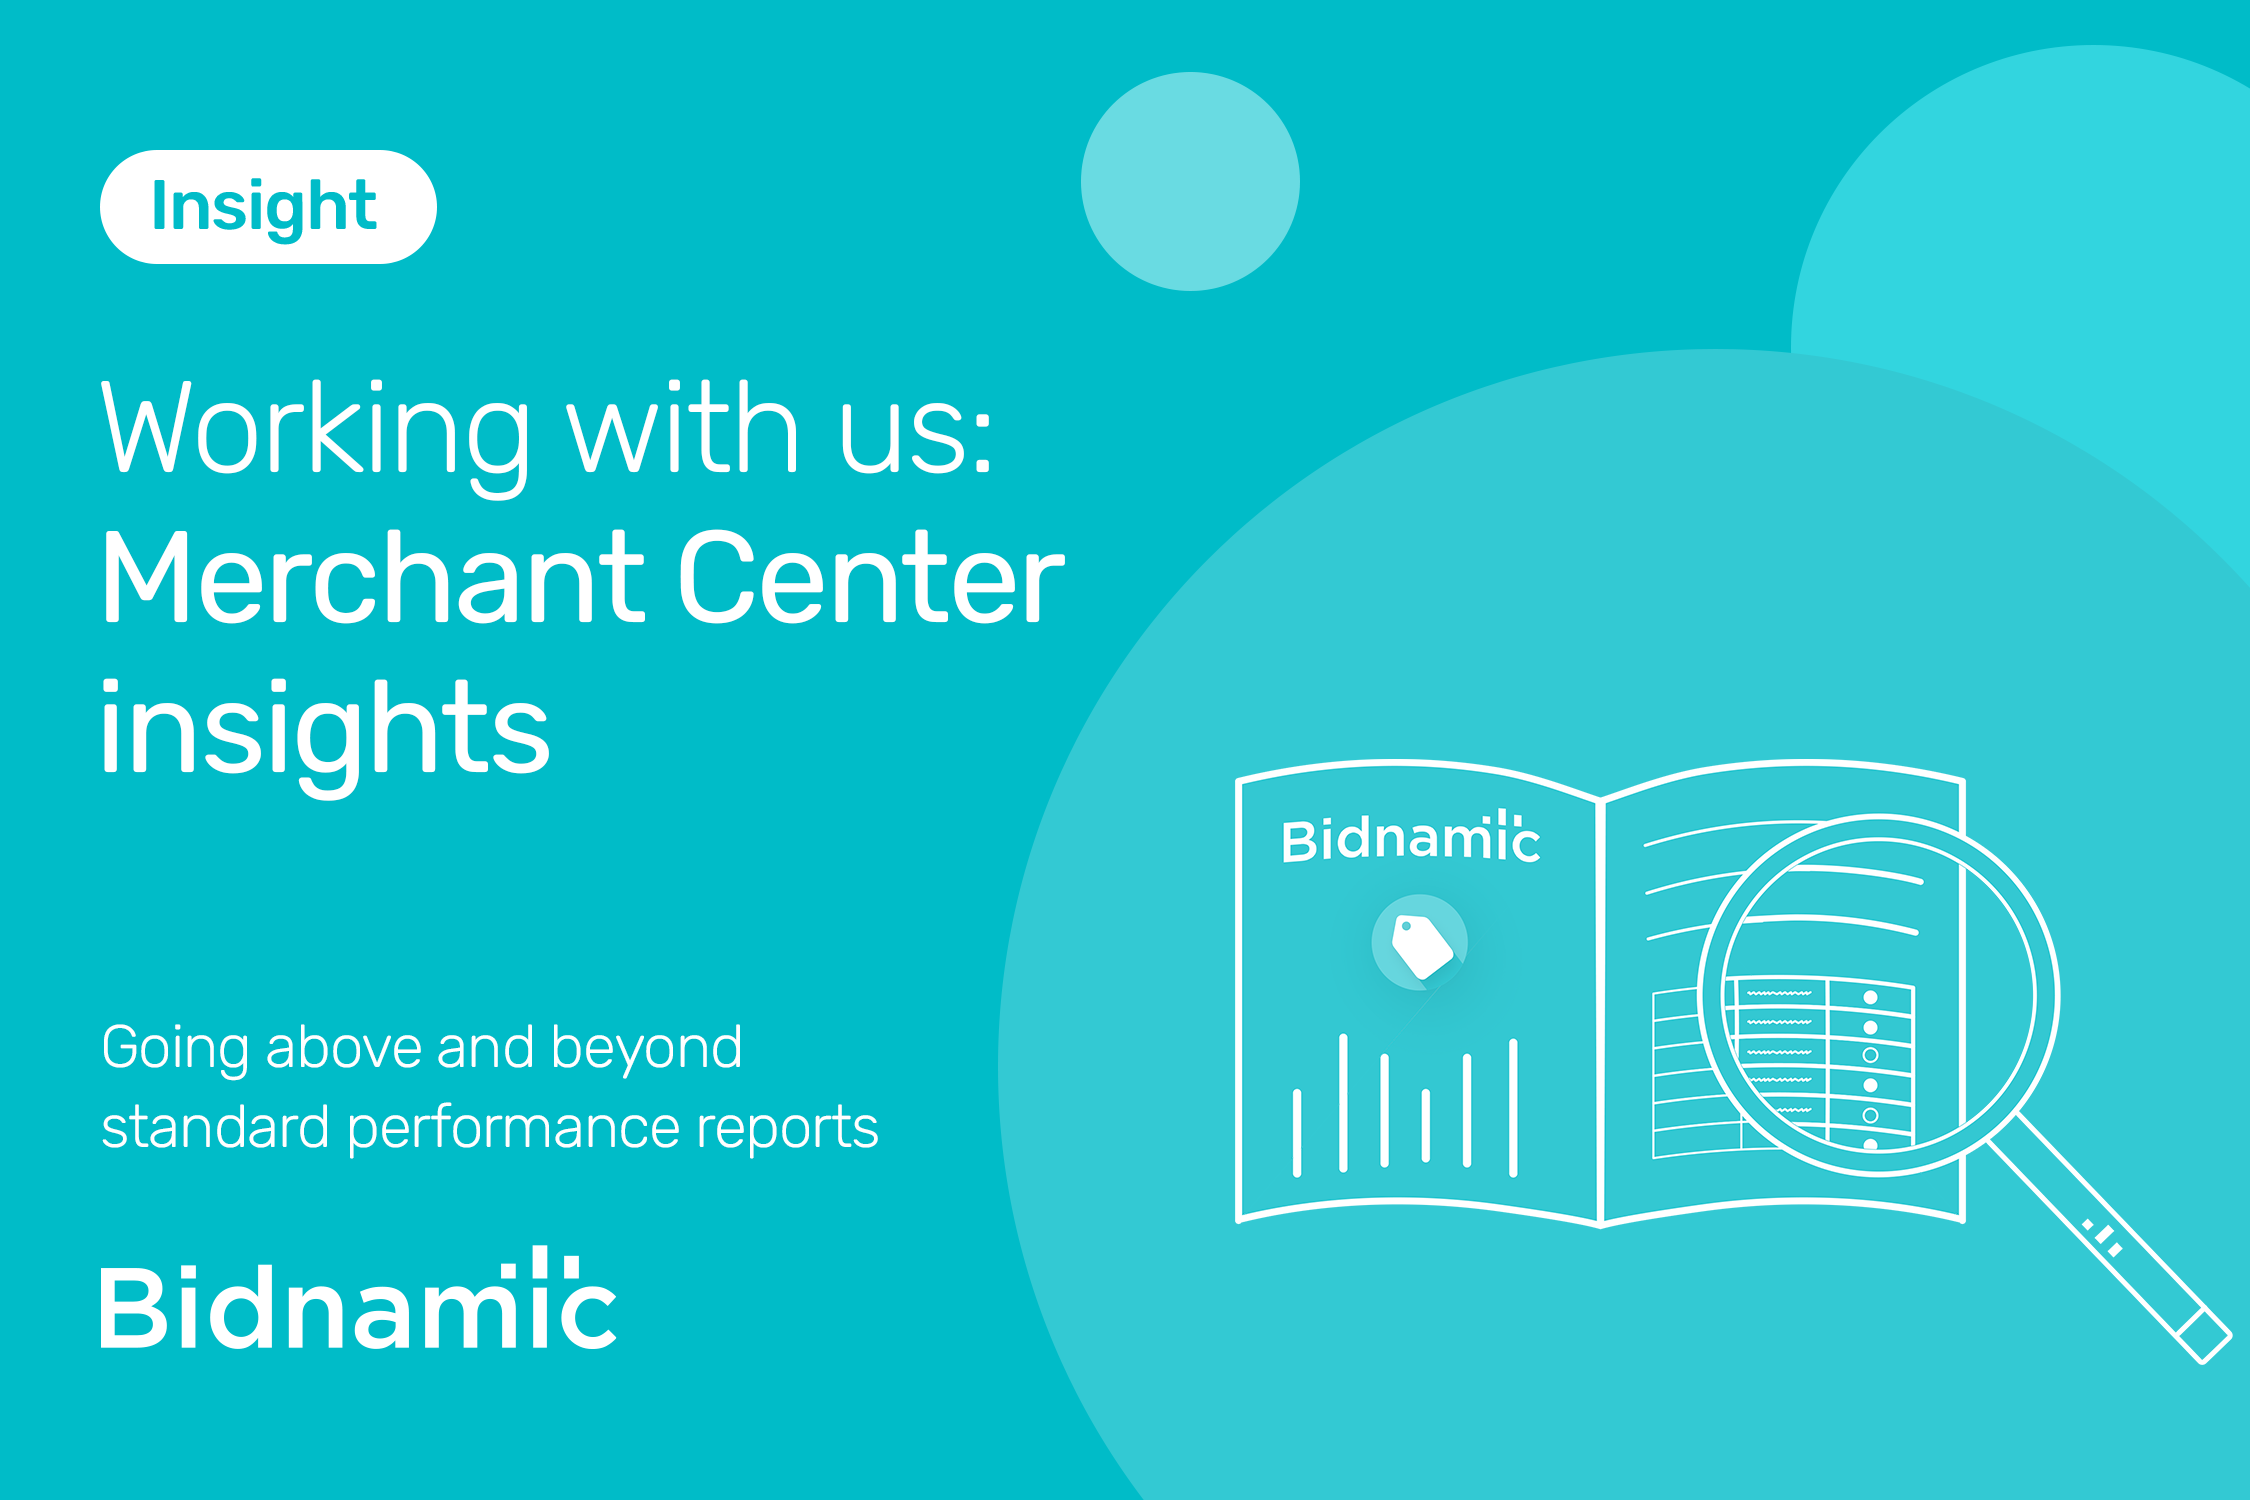 Working with us: Merchant Center insights